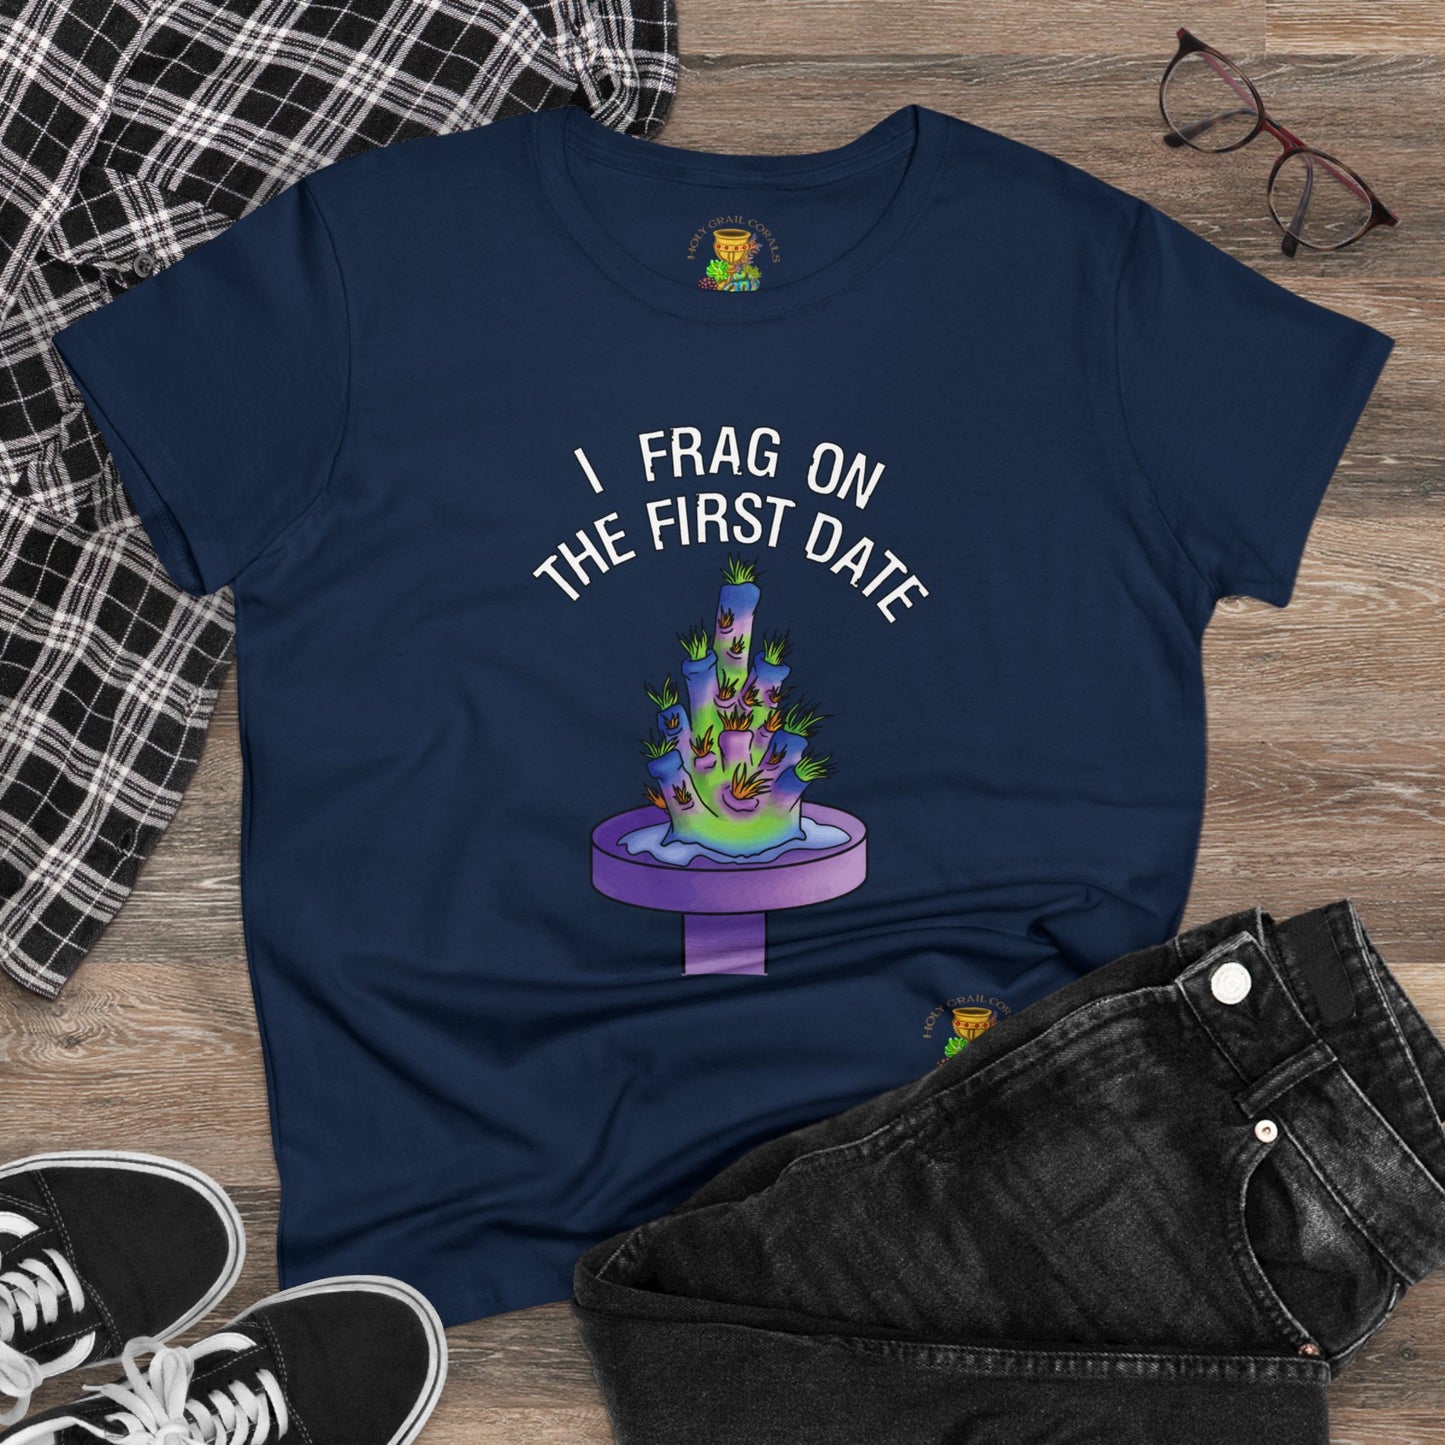 "I Frag On The First Date" Acropora Frag Women's Cotton Tee